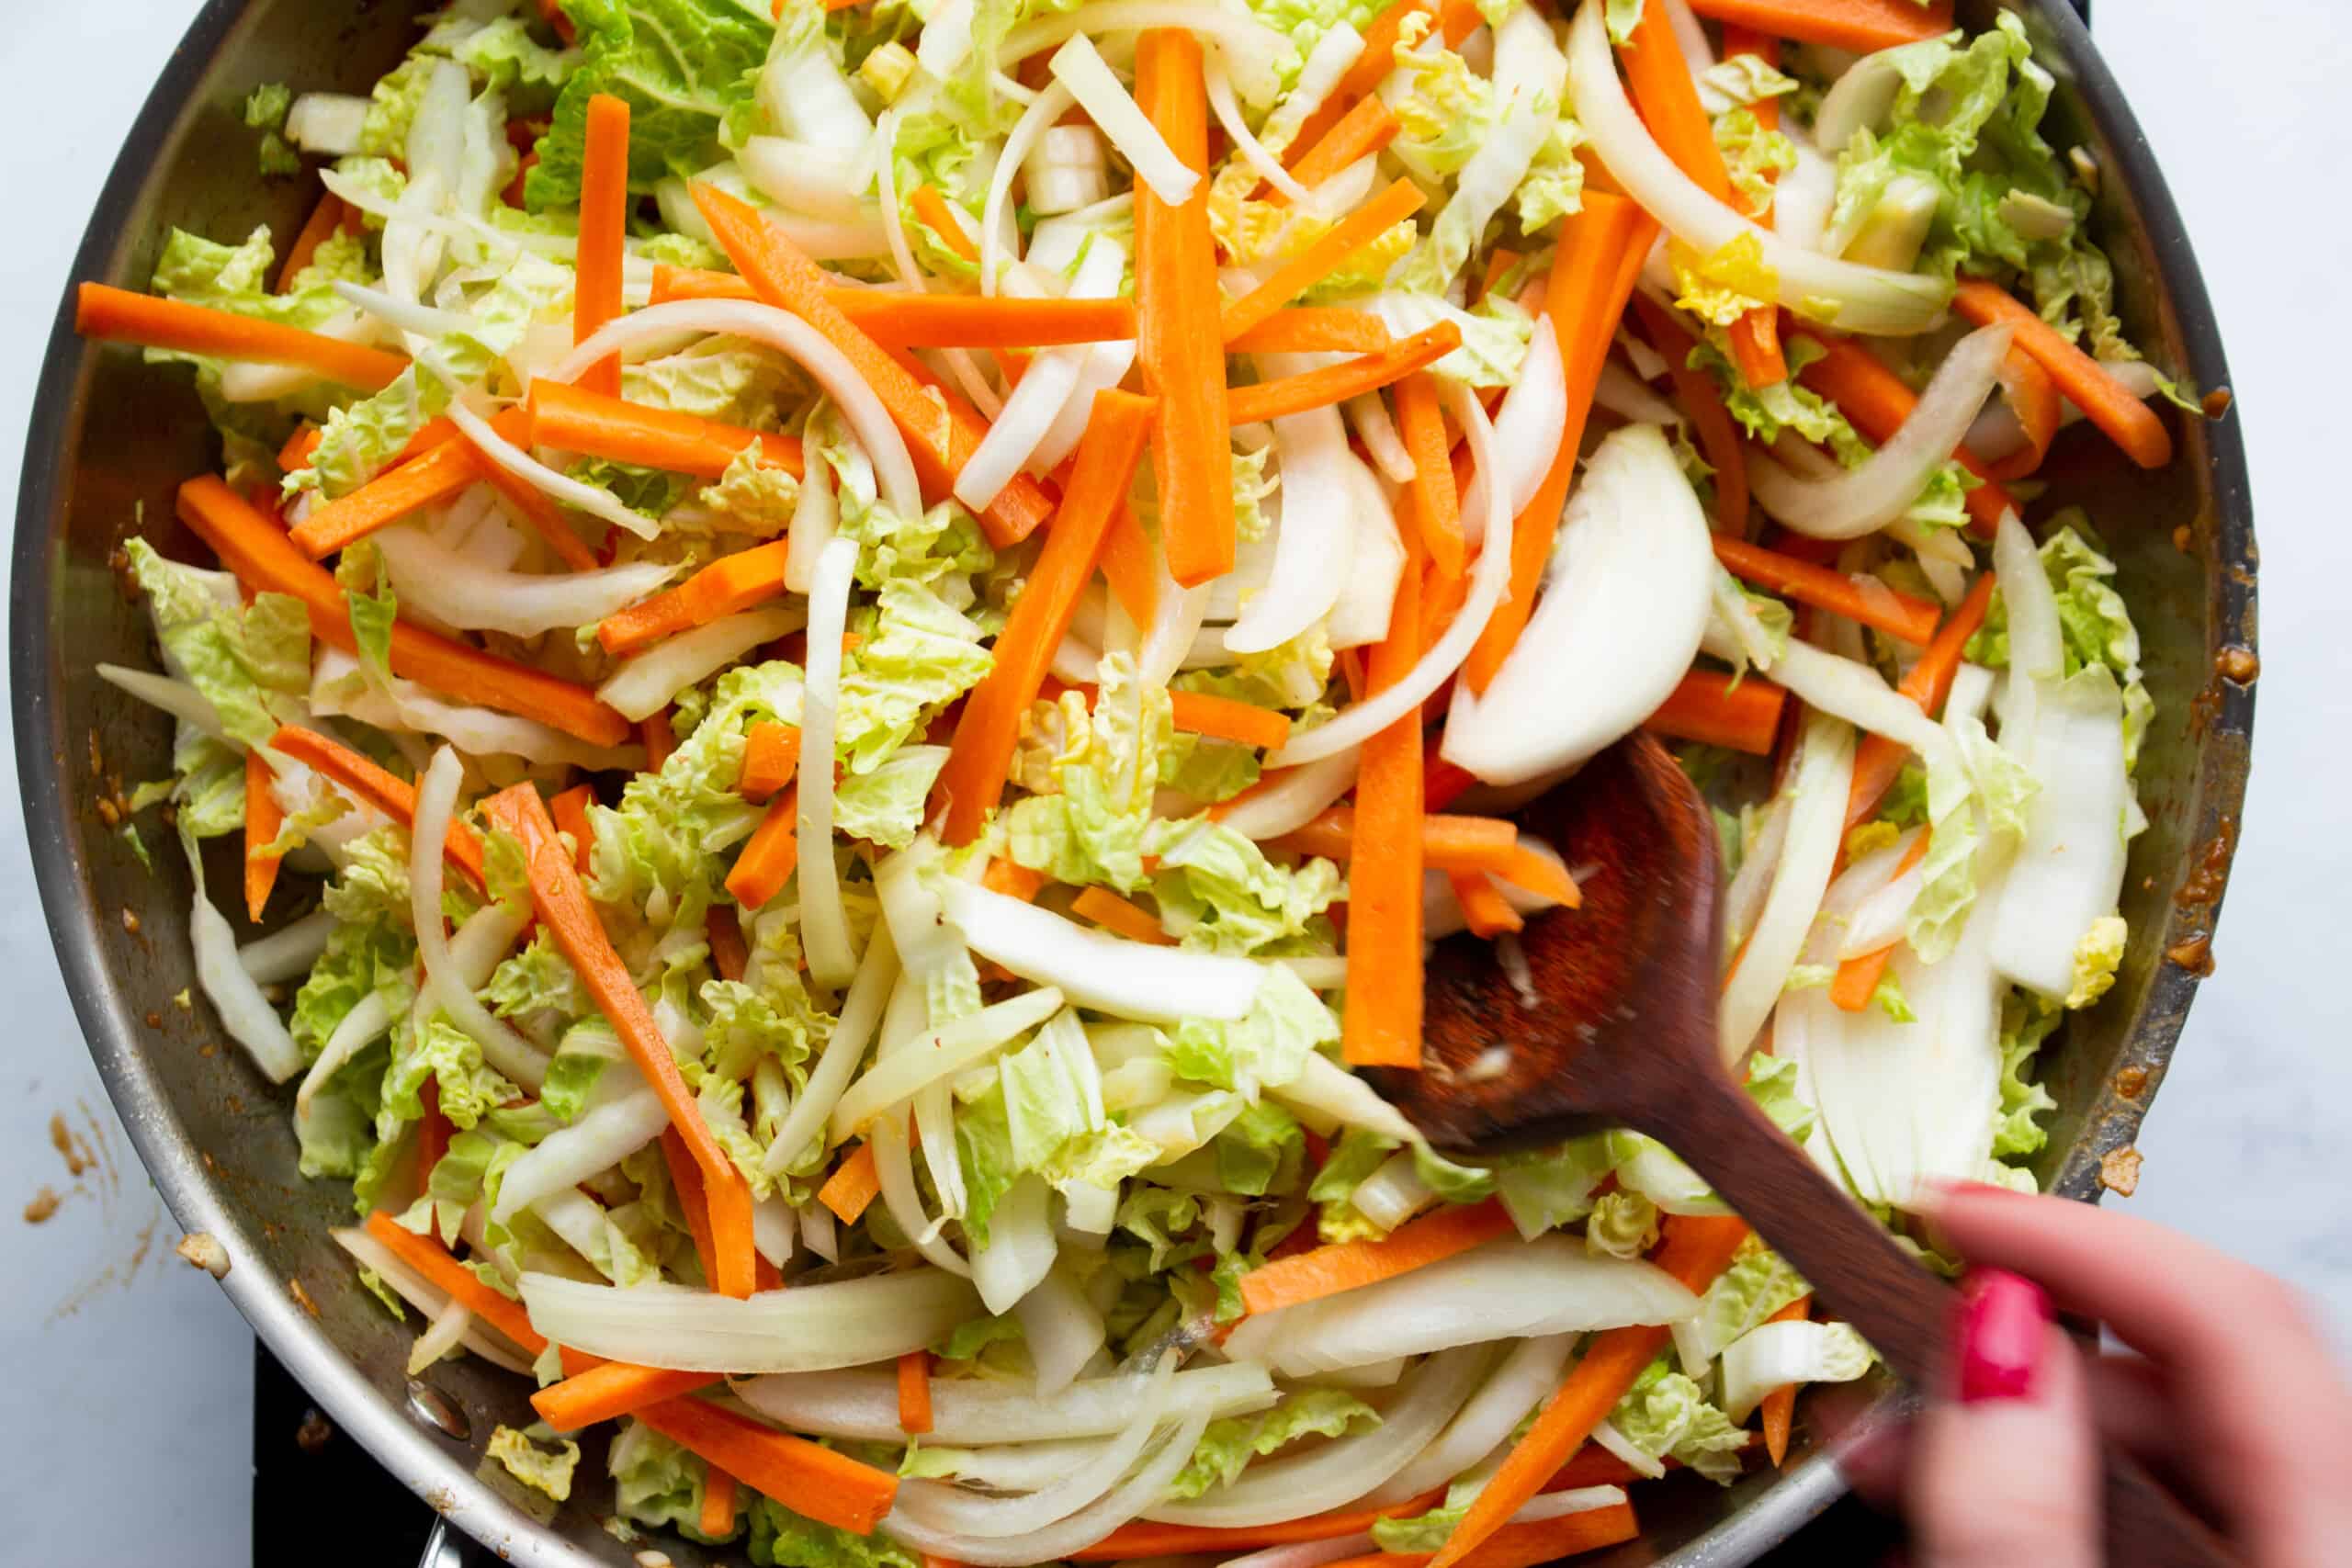 Sliced carrots and cabbage leaves in a large stainless steel pan mixed with a wooden spoon.